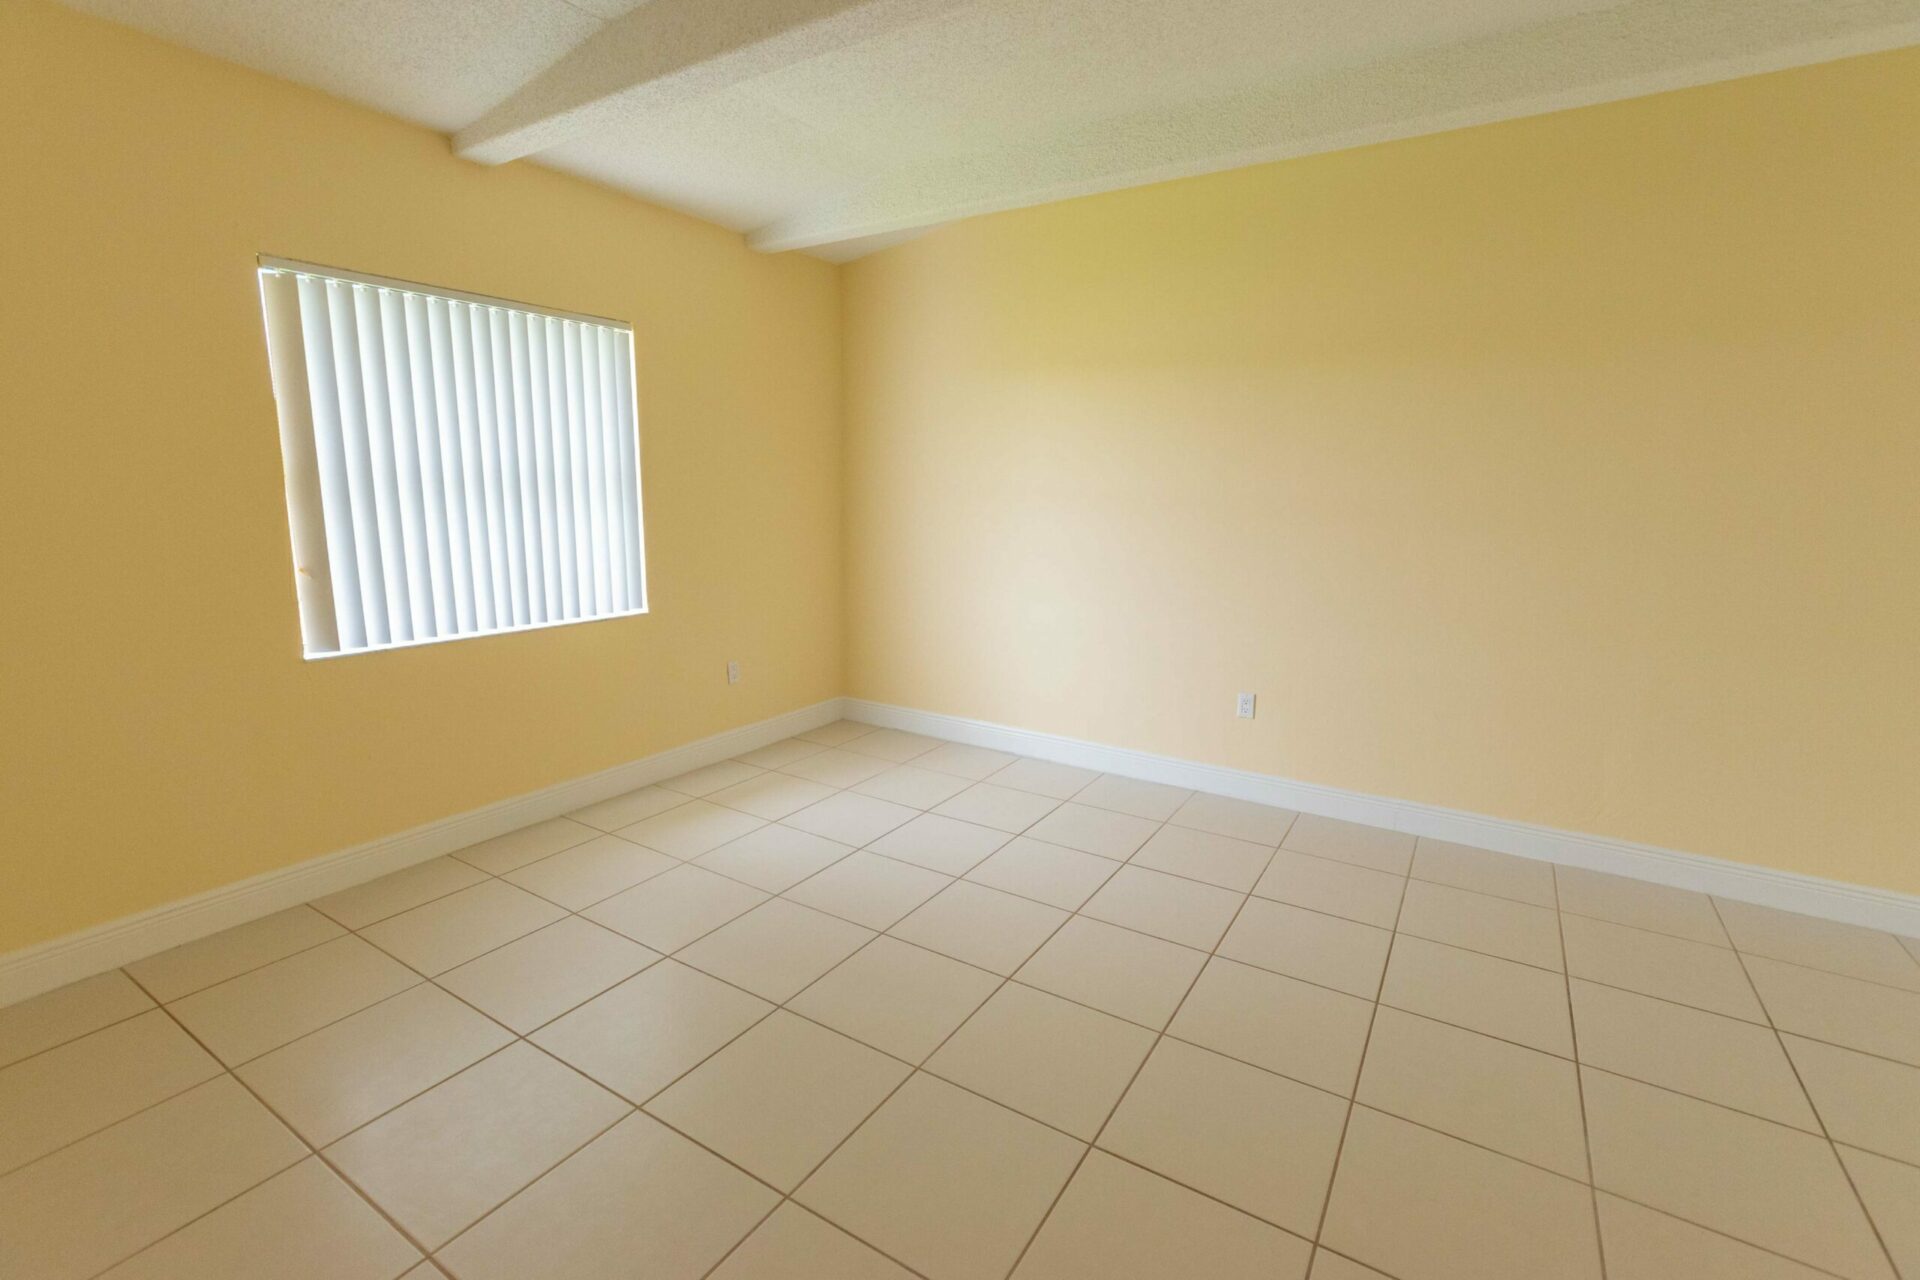 Spacious area with a large window, yellow walls, and white tiles.